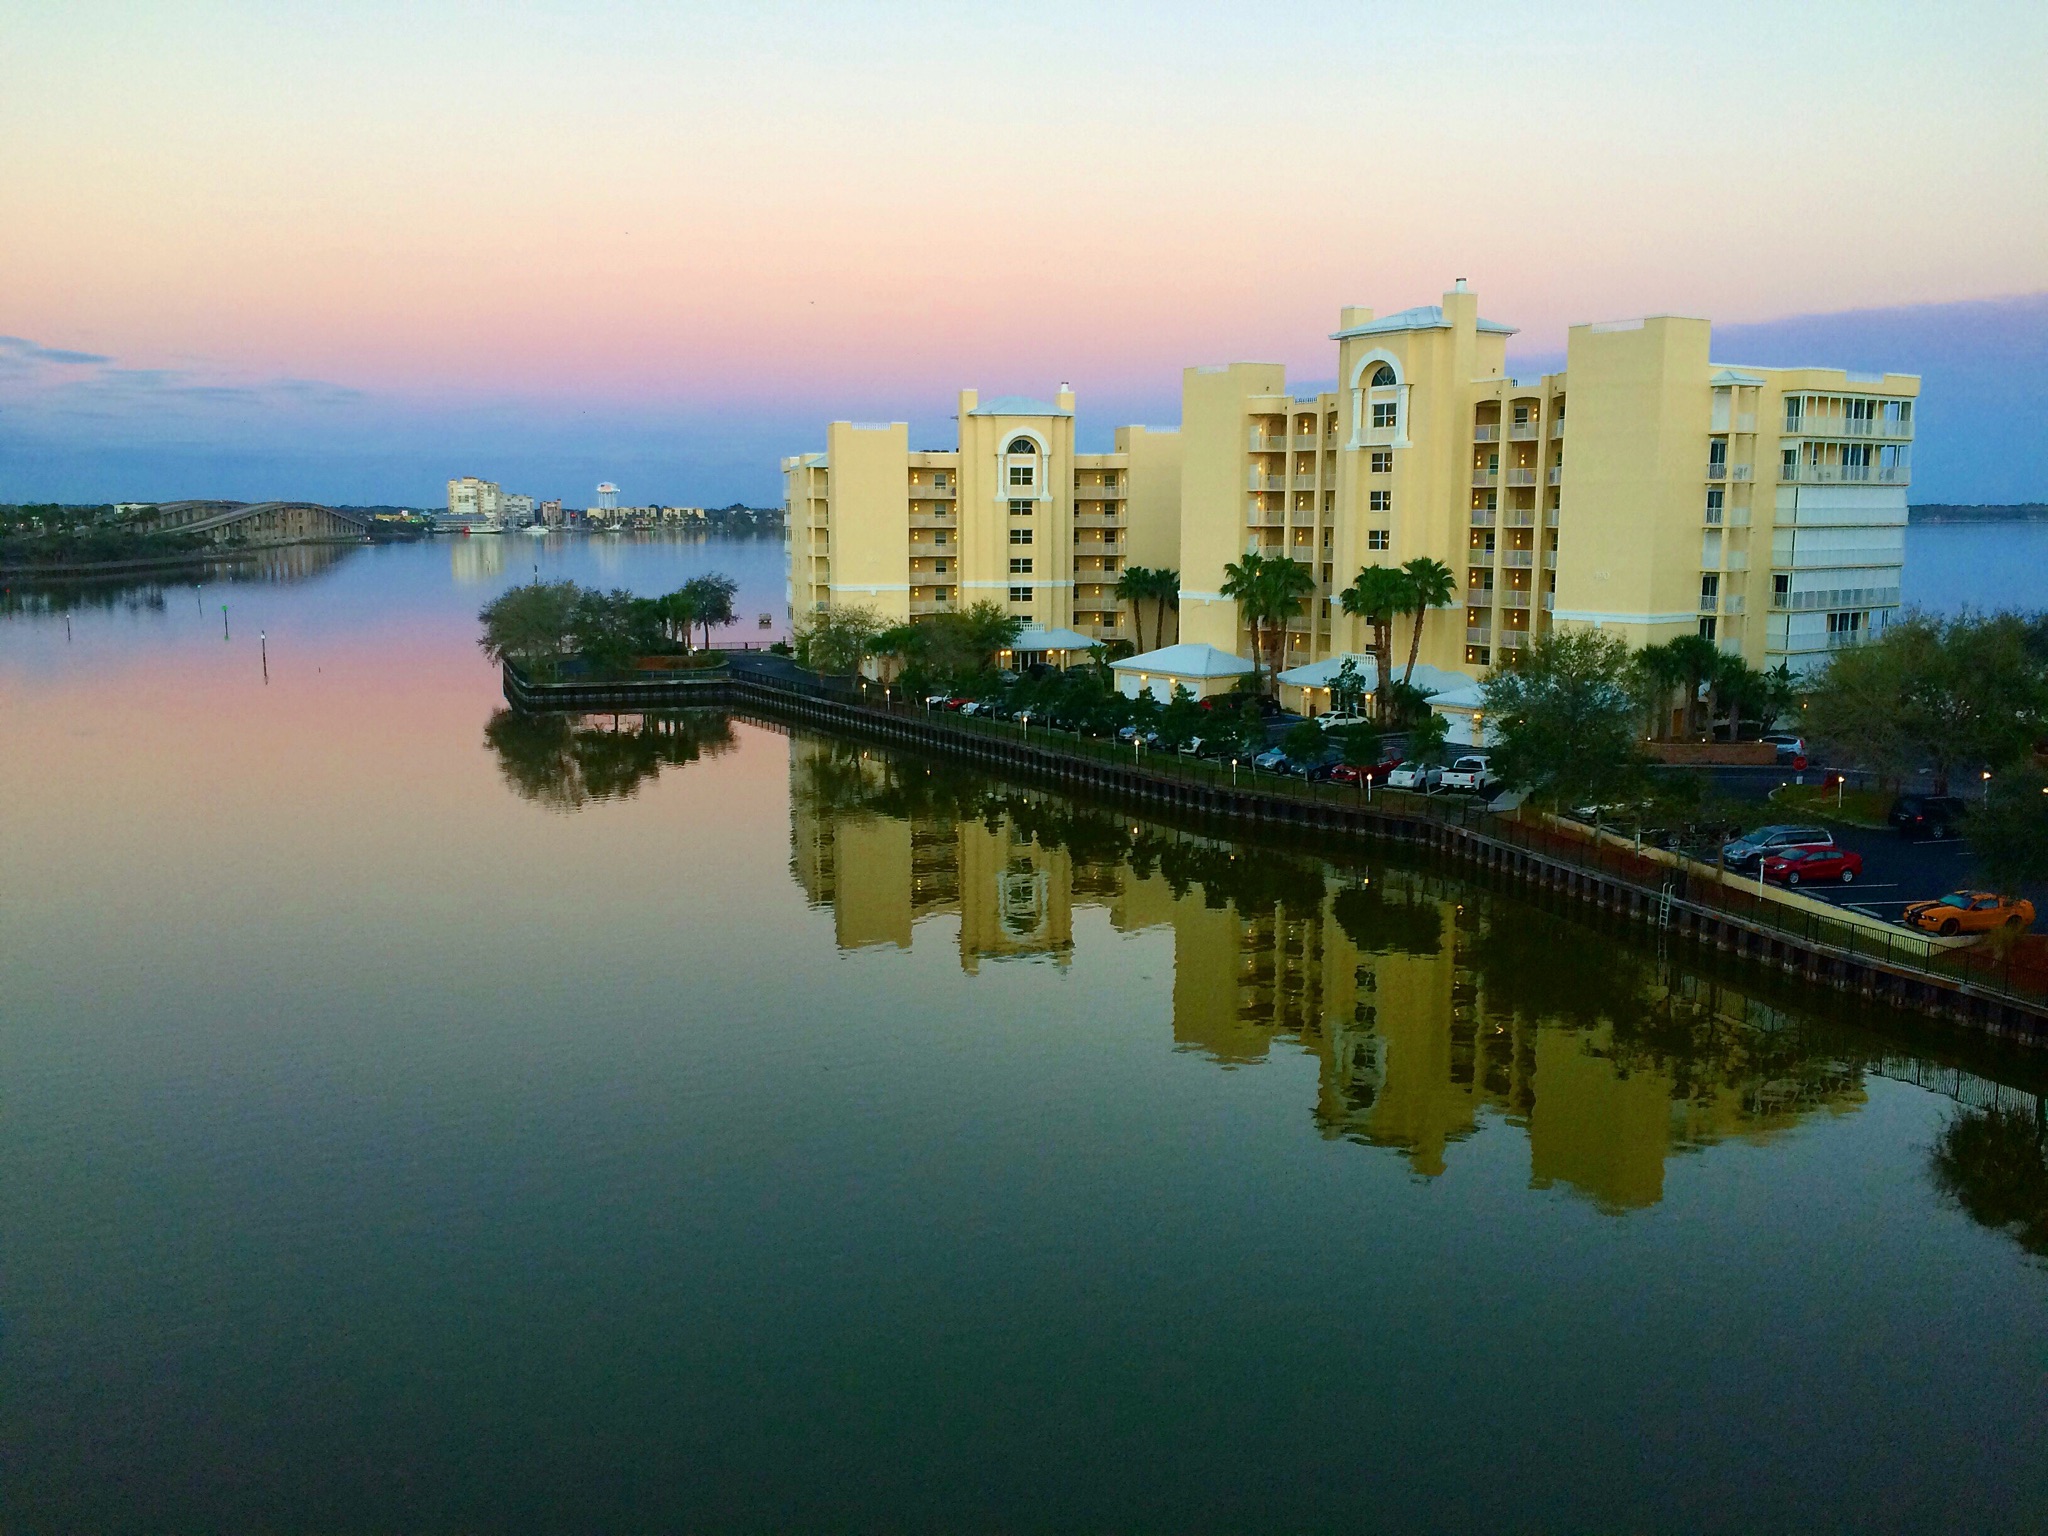 Island Pointe buildings casting reflections onto calm Lagoon waters by 134 resident DK (iPhone 5s)